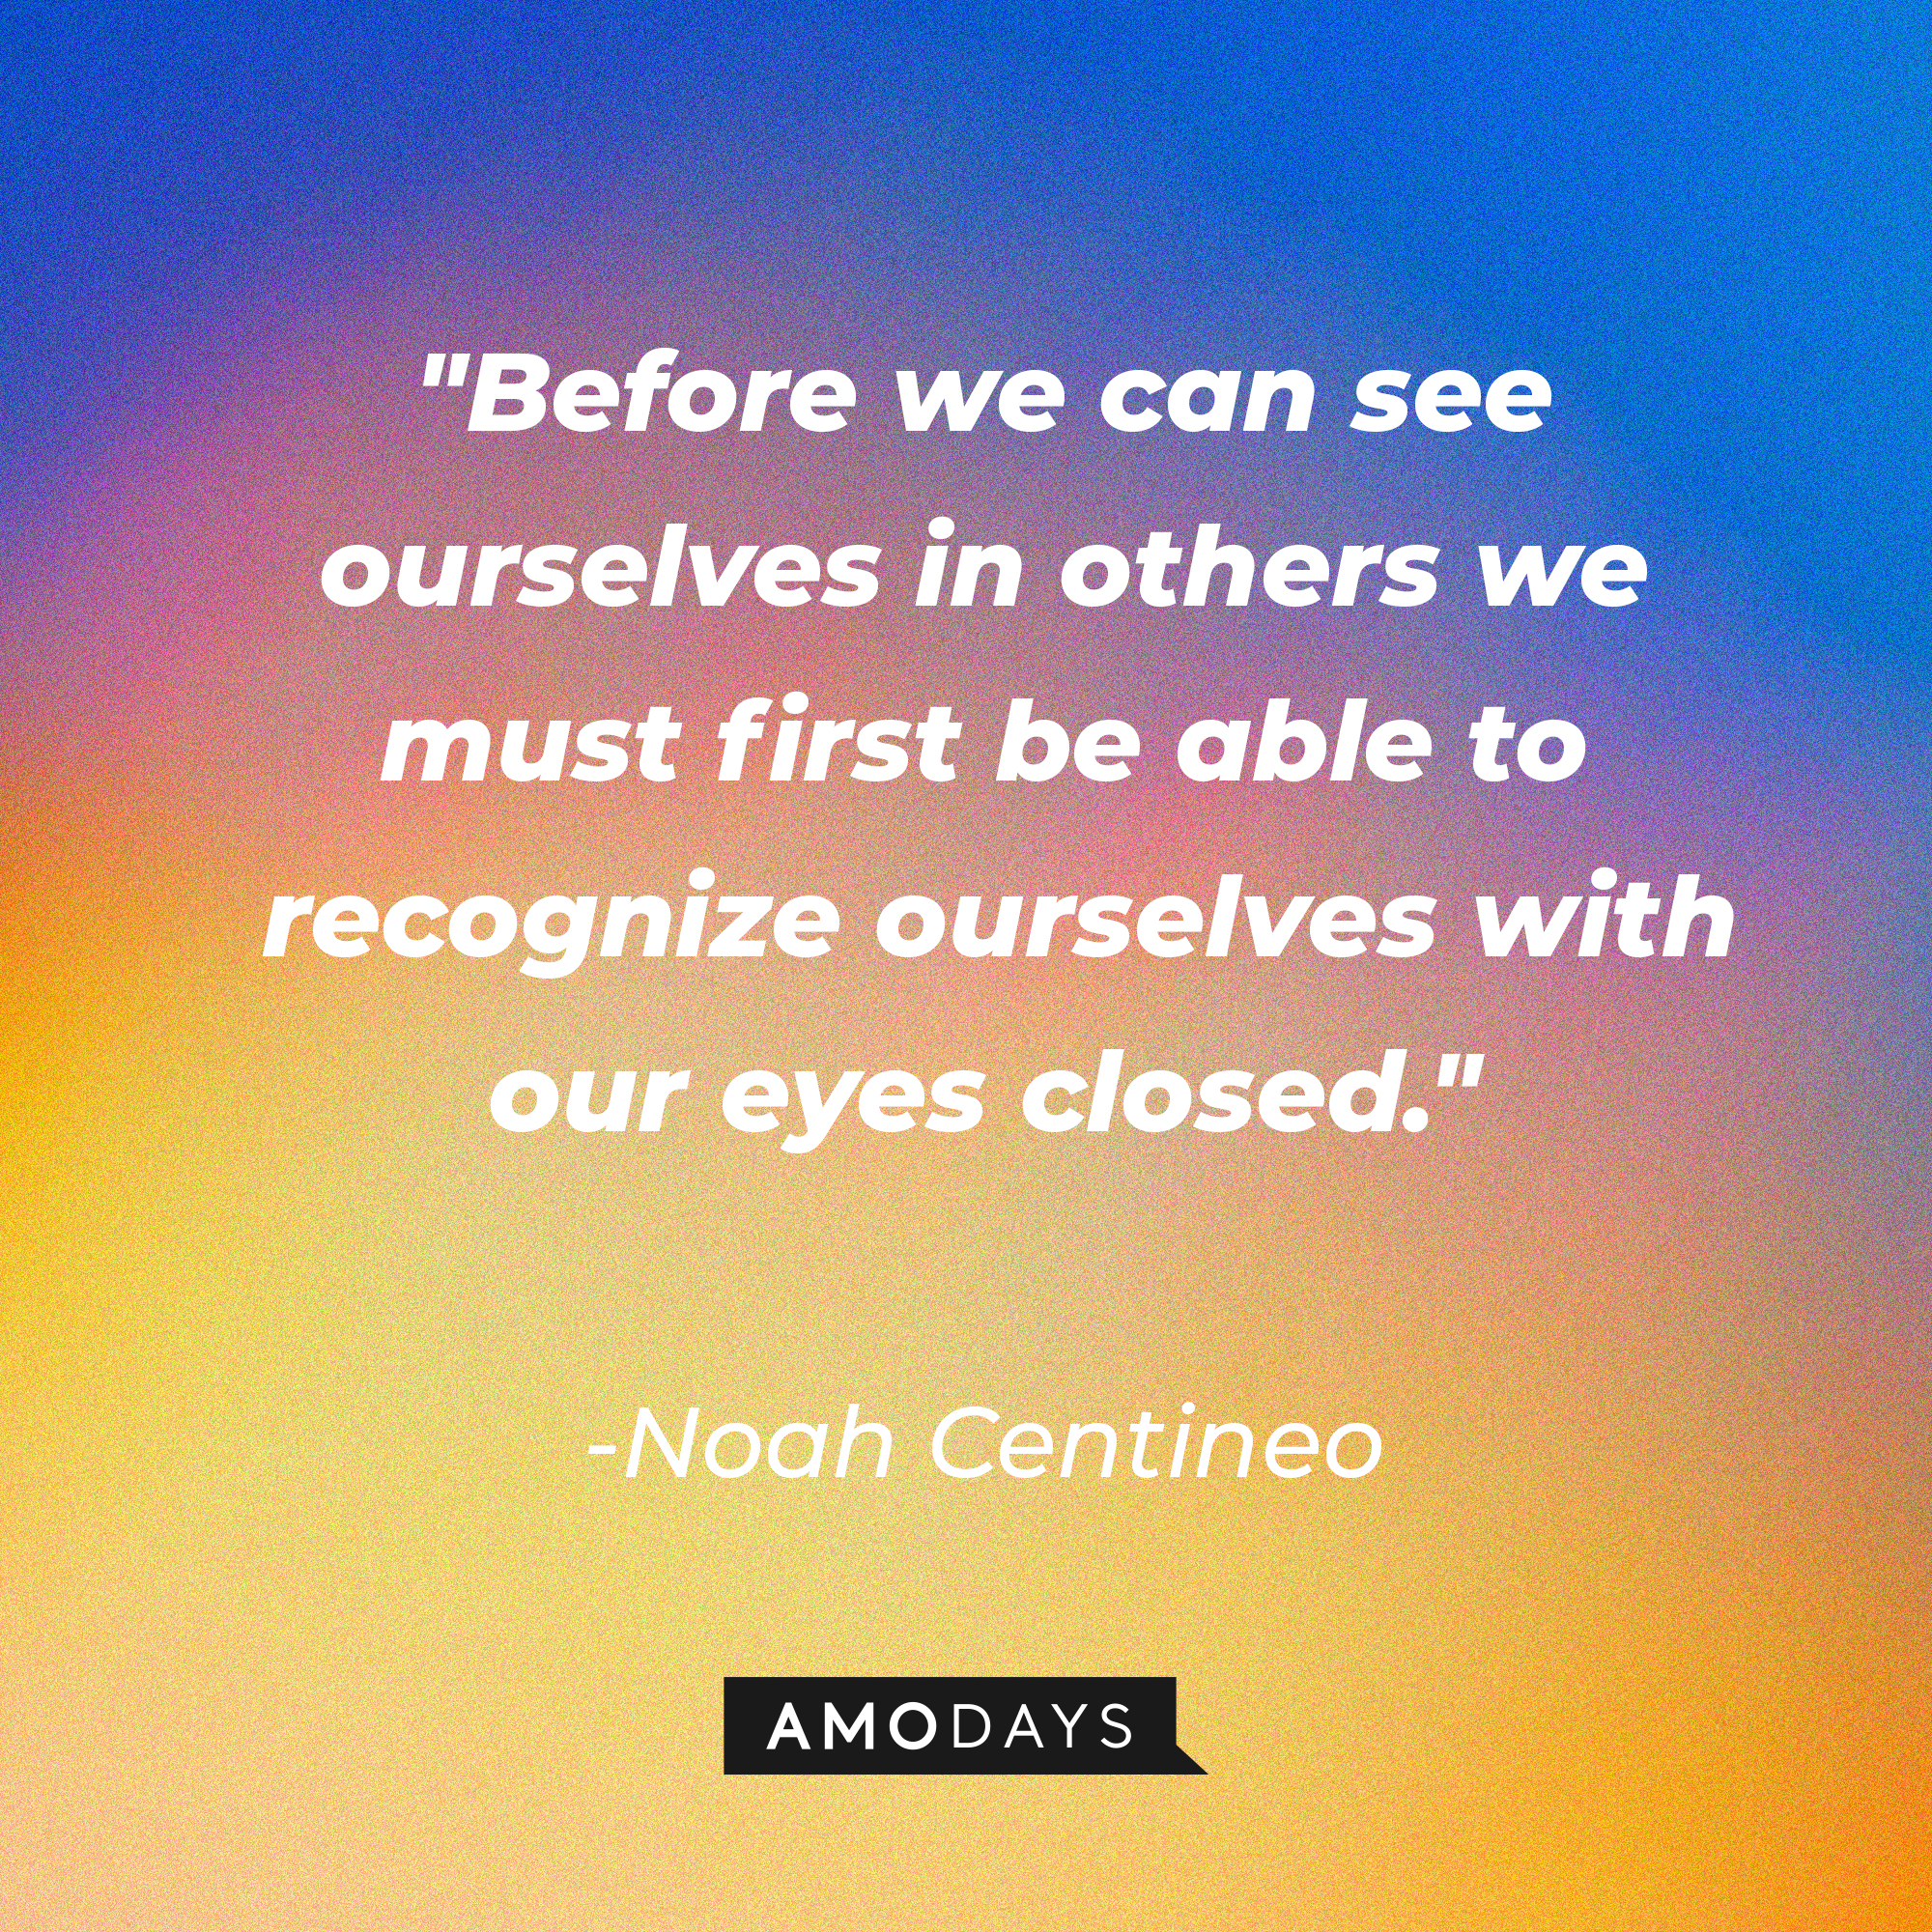 Noah Centineo's quote: "Before we can see ourselves in others we must first be able to recognize ourselves with our eyes closed." | Image: AmoDays